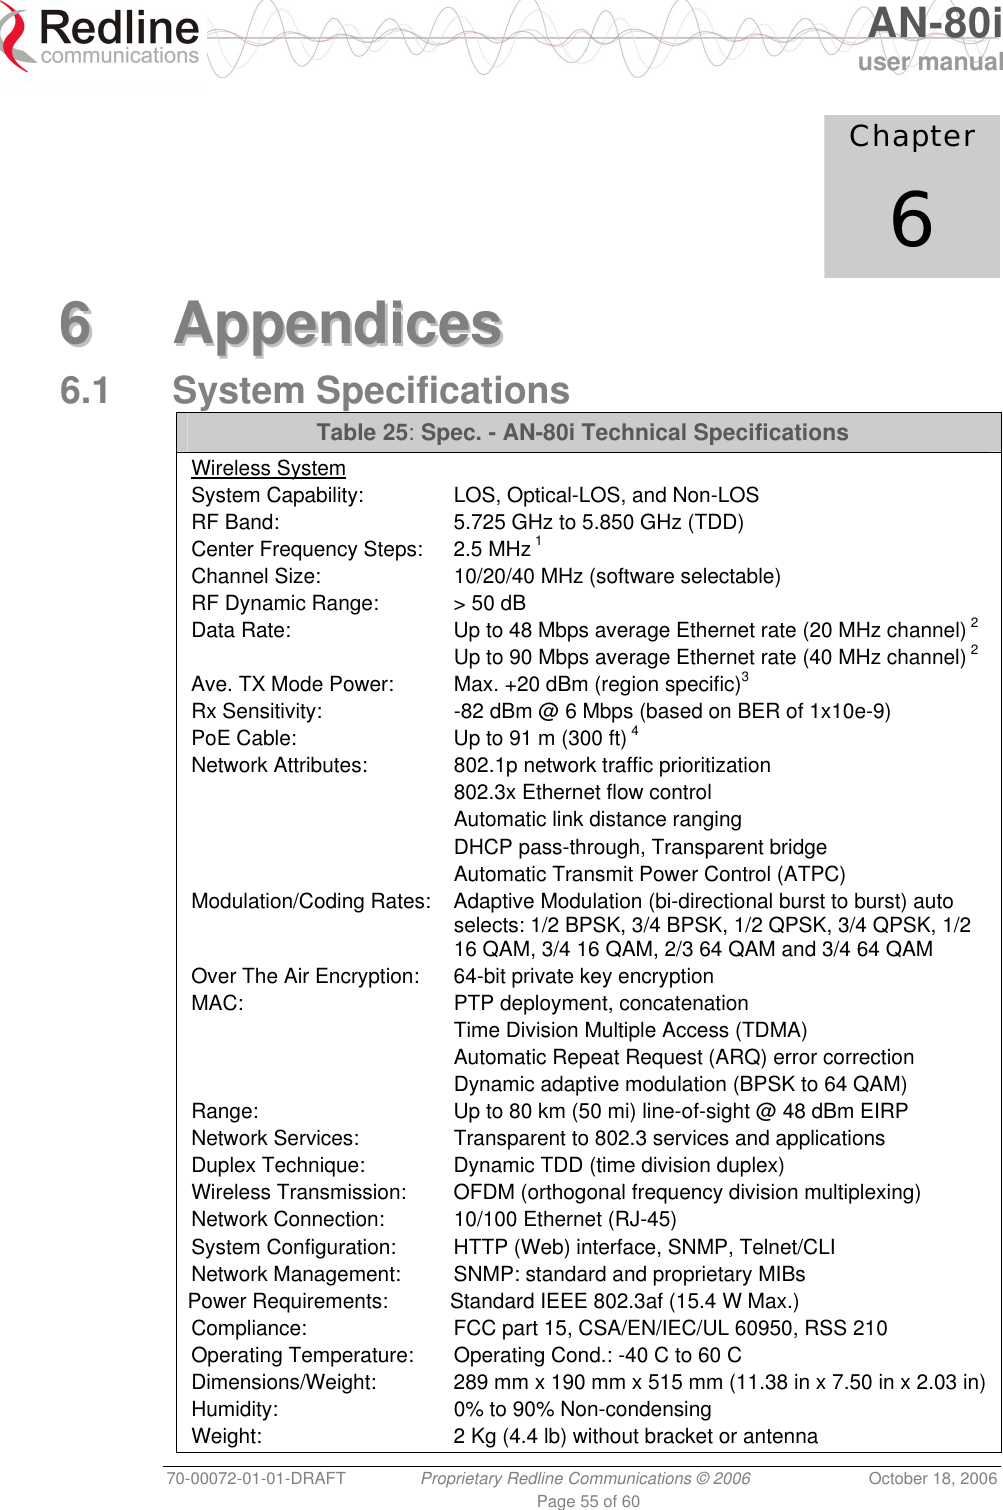   AN-80i user manual 70-00072-01-01-DRAFT  Proprietary Redline Communications © 2006  October 18, 2006 Page 55 of 60             Chapter 6  66  AAppppeennddiicceess  6.1 System Specifications Table 25: Spec. - AN-80i Technical Specifications Wireless System System Capability:  LOS, Optical-LOS, and Non-LOS RF Band:  5.725 GHz to 5.850 GHz (TDD) Center Frequency Steps:  2.5 MHz 1 Channel Size:  10/20/40 MHz (software selectable) RF Dynamic Range:  &gt; 50 dB Data Rate:  Up to 48 Mbps average Ethernet rate (20 MHz channel) 2   Up to 90 Mbps average Ethernet rate (40 MHz channel) 2 Ave. TX Mode Power:  Max. +20 dBm (region specific)3 Rx Sensitivity:  -82 dBm @ 6 Mbps (based on BER of 1x10e-9) PoE Cable:  Up to 91 m (300 ft) 4 Network Attributes:  802.1p network traffic prioritization   802.3x Ethernet flow control   Automatic link distance ranging   DHCP pass-through, Transparent bridge   Automatic Transmit Power Control (ATPC) Modulation/Coding Rates:  Adaptive Modulation (bi-directional burst to burst) auto selects: 1/2 BPSK, 3/4 BPSK, 1/2 QPSK, 3/4 QPSK, 1/2 16 QAM, 3/4 16 QAM, 2/3 64 QAM and 3/4 64 QAM Over The Air Encryption:  64-bit private key encryption MAC:  PTP deployment, concatenation   Time Division Multiple Access (TDMA)   Automatic Repeat Request (ARQ) error correction   Dynamic adaptive modulation (BPSK to 64 QAM) Range:  Up to 80 km (50 mi) line-of-sight @ 48 dBm EIRP Network Services:  Transparent to 802.3 services and applications Duplex Technique:  Dynamic TDD (time division duplex) Wireless Transmission:  OFDM (orthogonal frequency division multiplexing) Network Connection:  10/100 Ethernet (RJ-45) System Configuration:  HTTP (Web) interface, SNMP, Telnet/CLI Network Management:  SNMP: standard and proprietary MIBs Power Requirements:  Standard IEEE 802.3af (15.4 W Max.) Compliance:  FCC part 15, CSA/EN/IEC/UL 60950, RSS 210 Operating Temperature:  Operating Cond.: -40 C to 60 C Dimensions/Weight:  289 mm x 190 mm x 515 mm (11.38 in x 7.50 in x 2.03 in) Humidity:  0% to 90% Non-condensing Weight:  2 Kg (4.4 lb) without bracket or antenna 